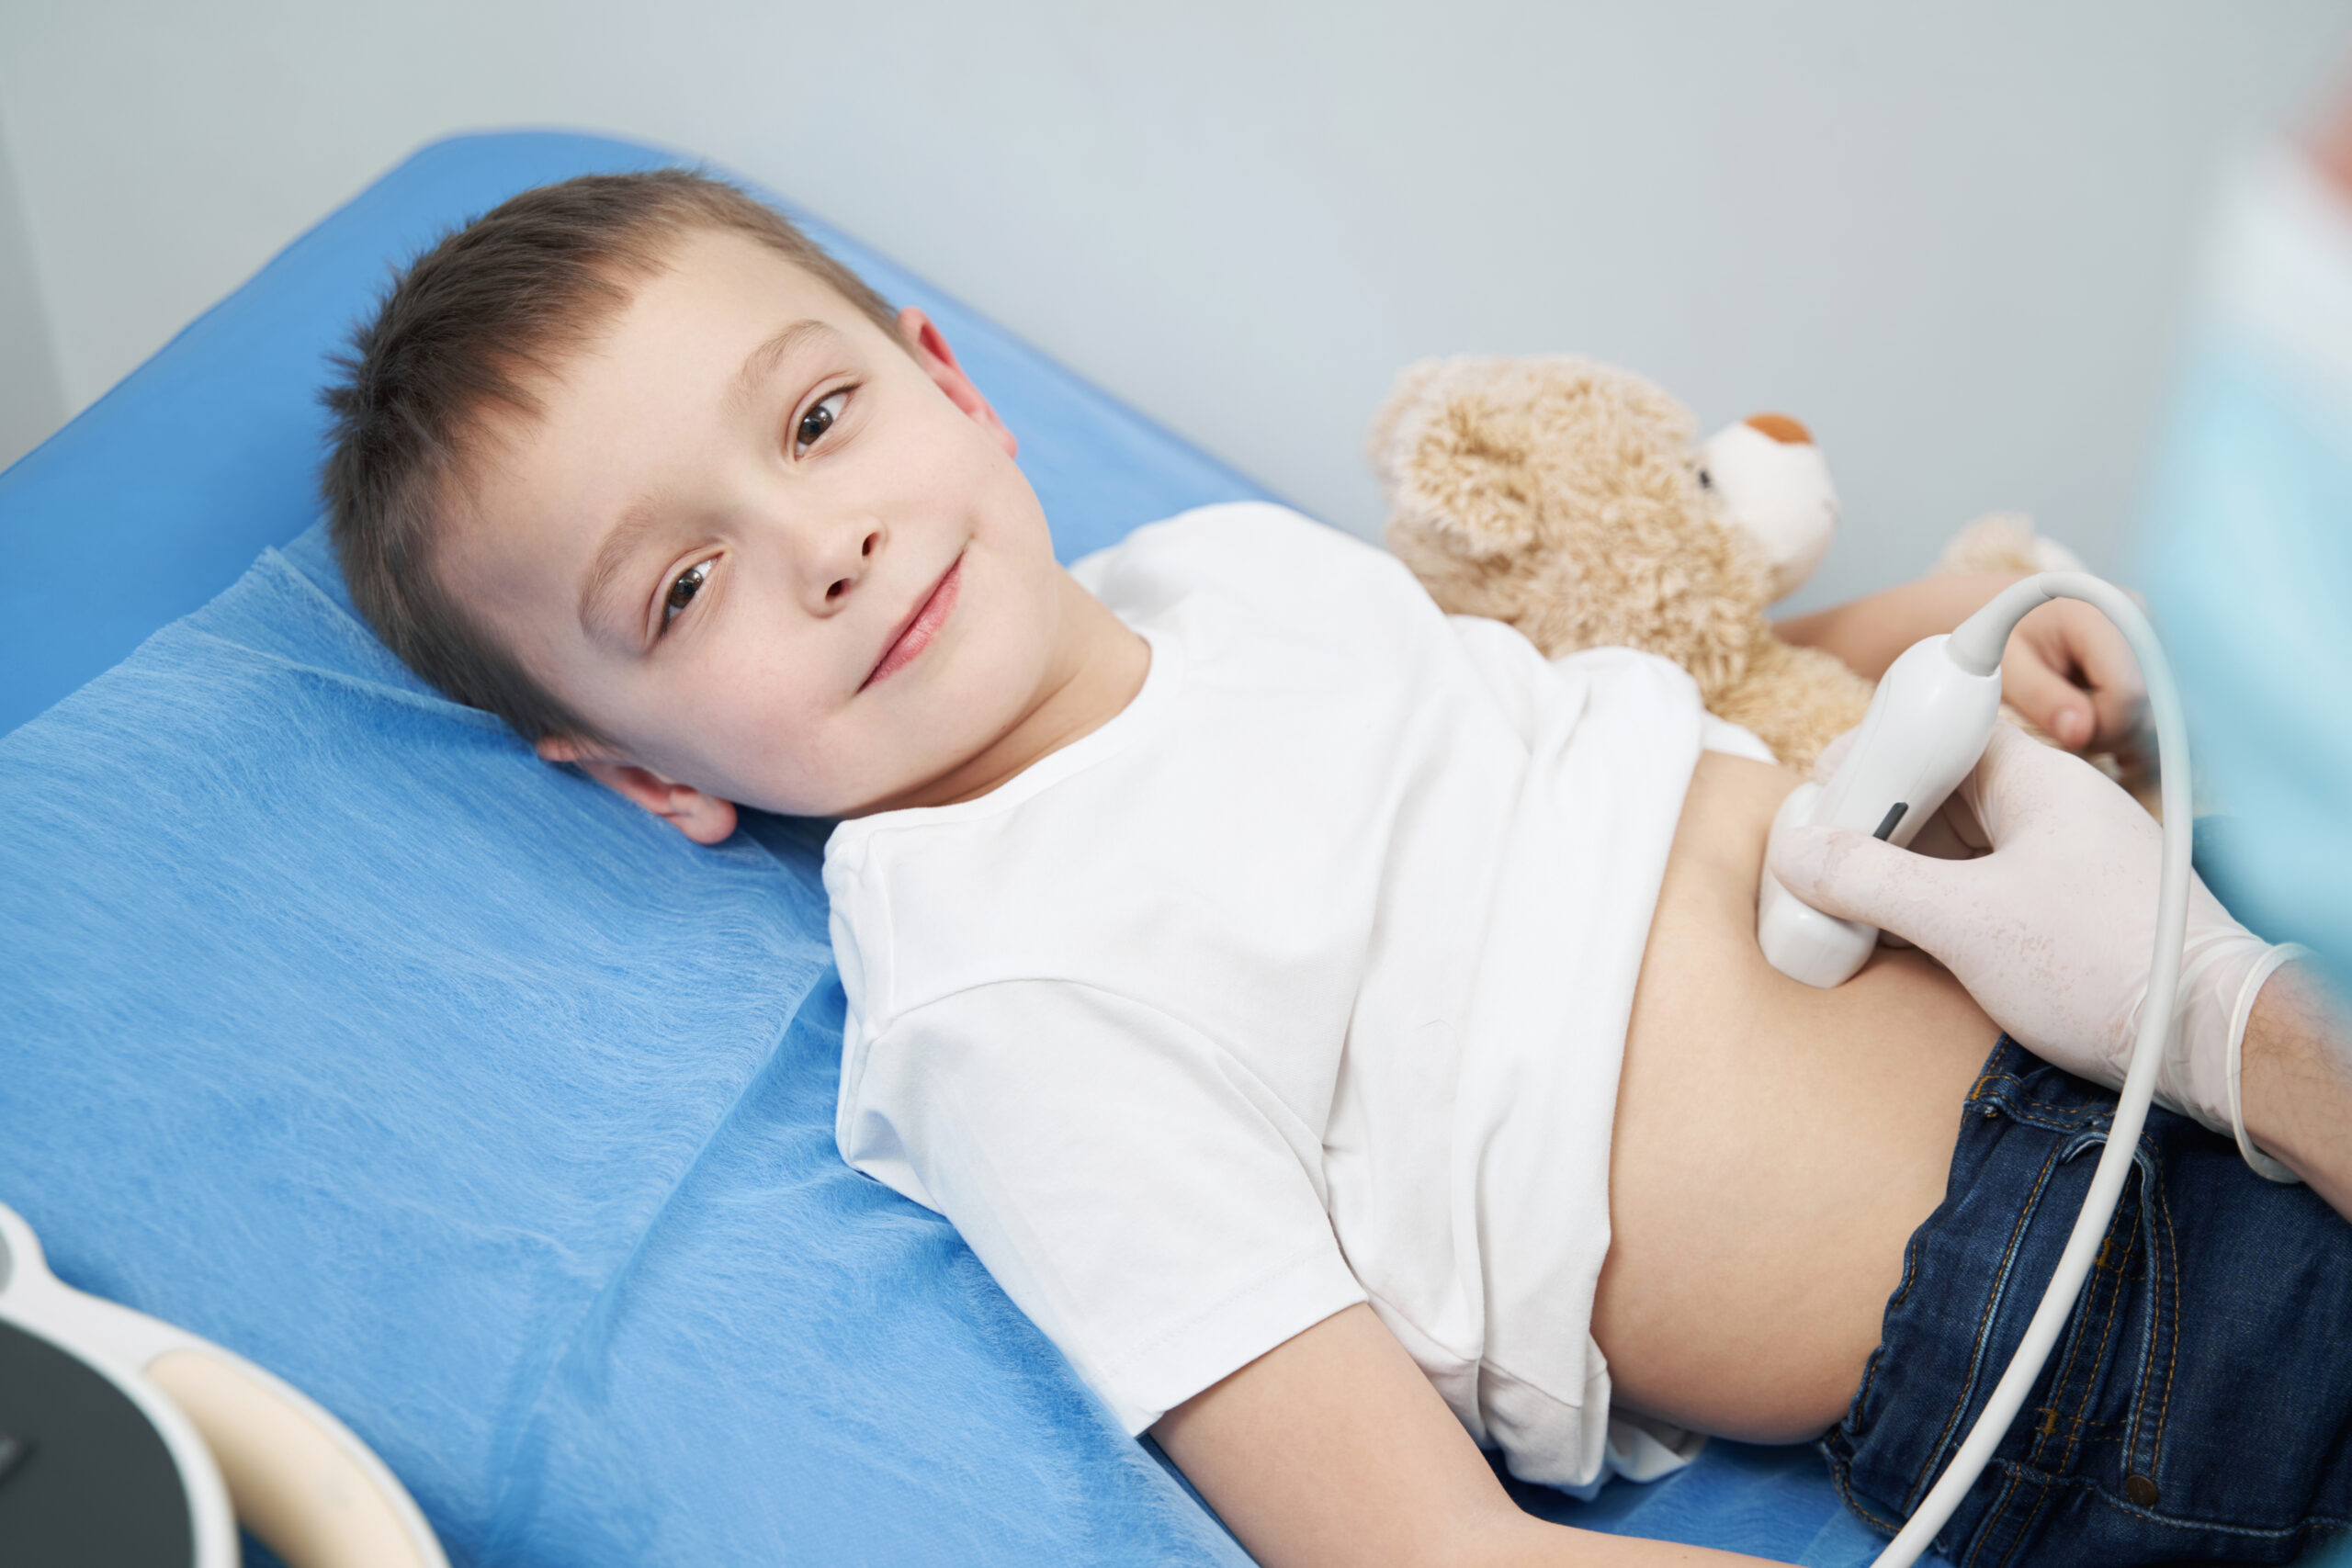 Smiling young boy lying on couch in clinic undergoing an abdominal ultrasound